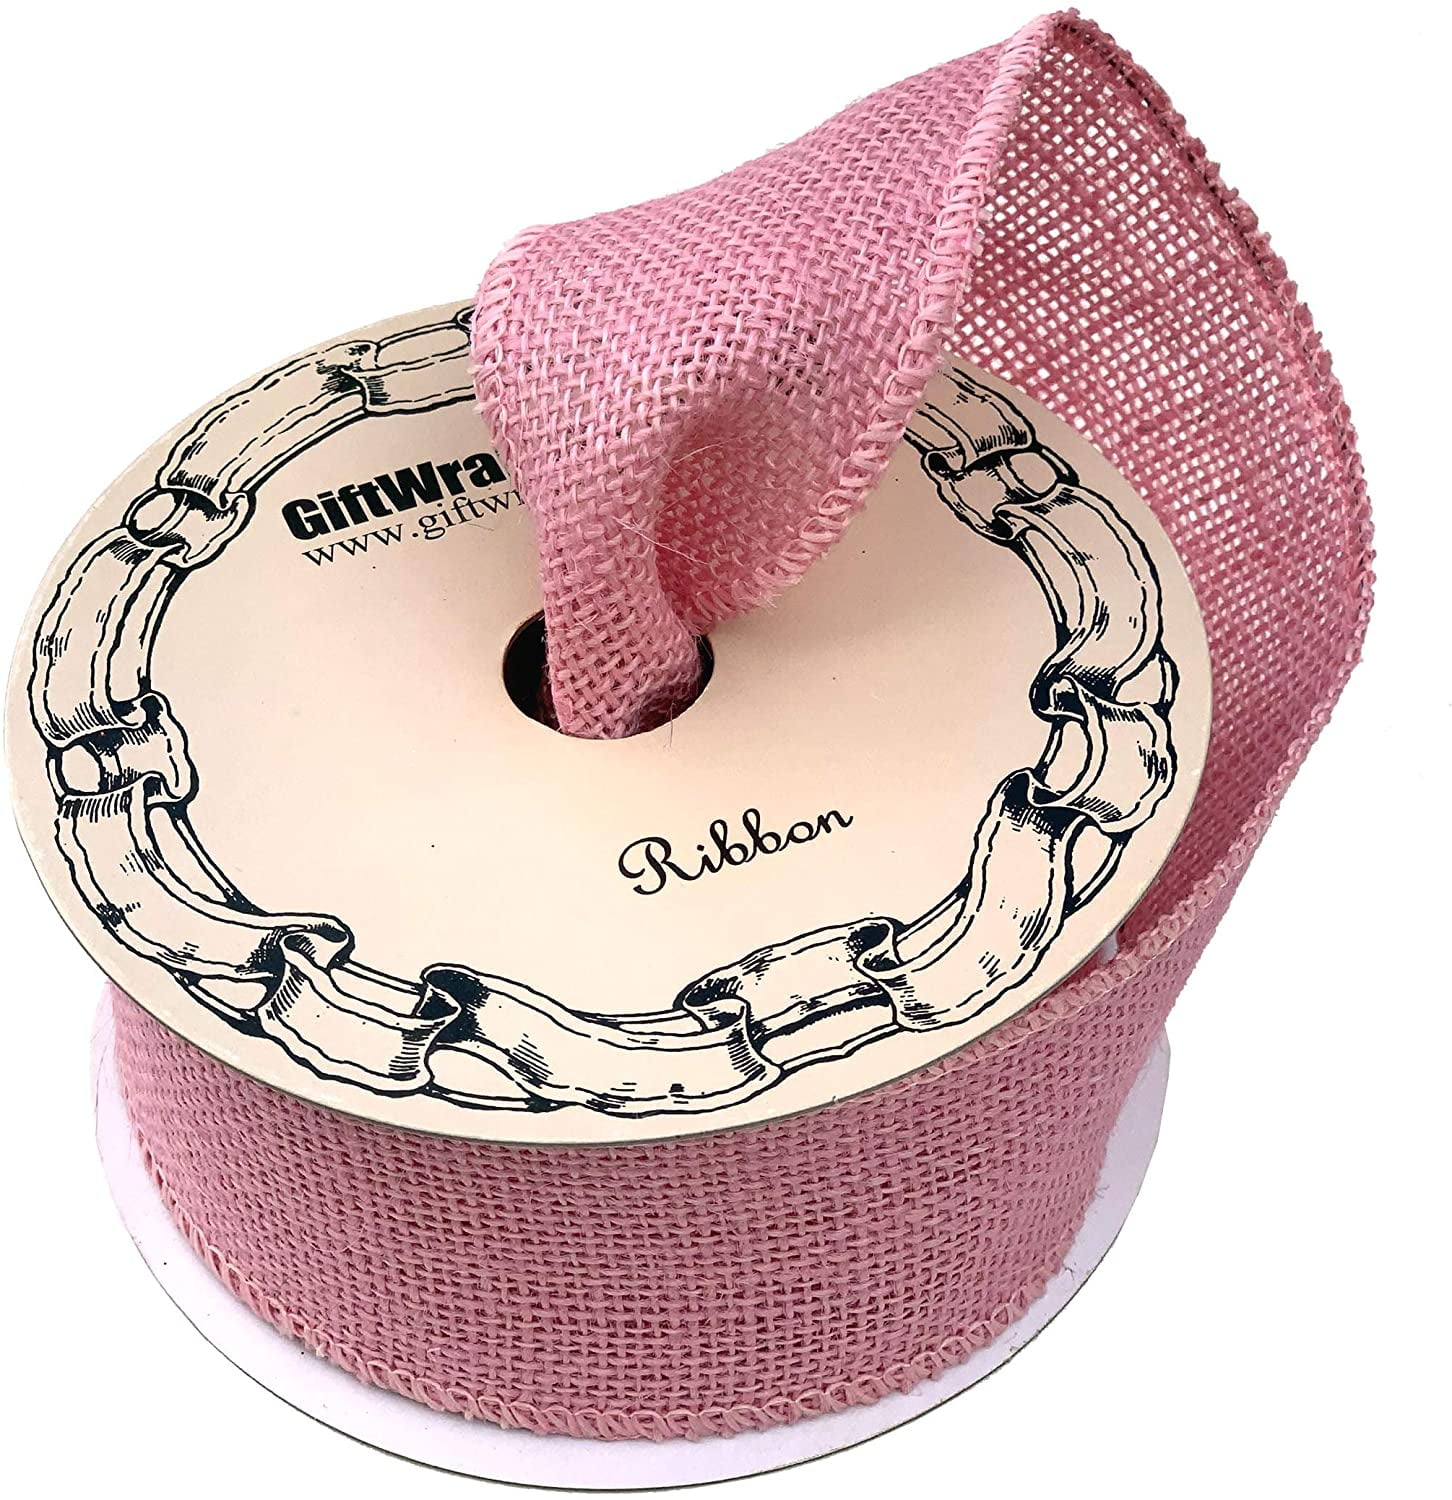  MEEDEE Pink Burlap Ribbon 1.5 Inch Pink Wired Ribbon Light Pink  Burlap Ribbon Wired Baby Pink Ribbon for Baby Shower, Crafts, Wreath,  Wedding, Gift Wrapping, Garland, Bows Making, Swag (10 Yards)